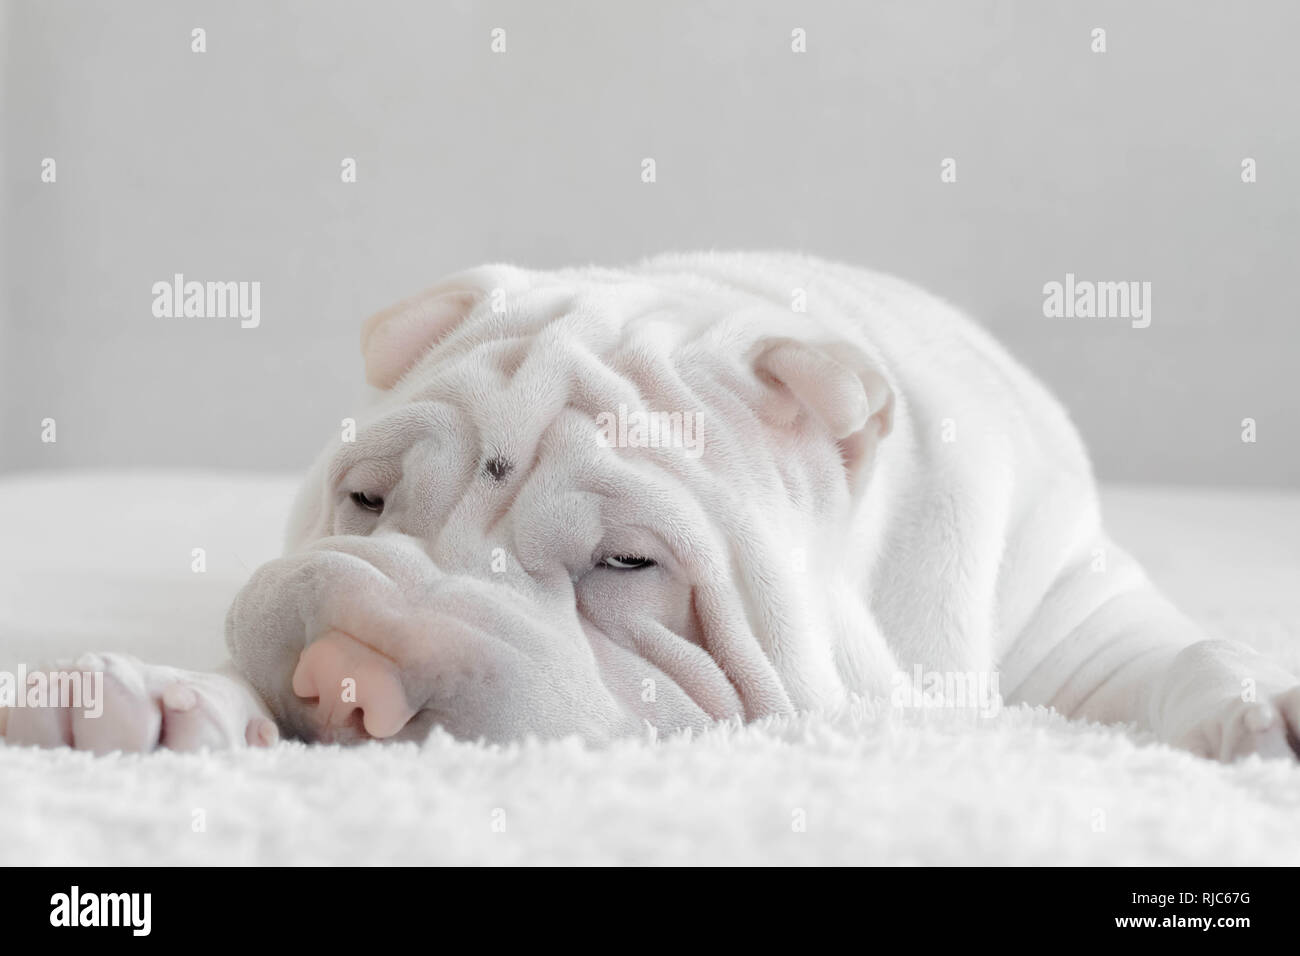 Shar pei puppy dog lying on a bed Stock Photo